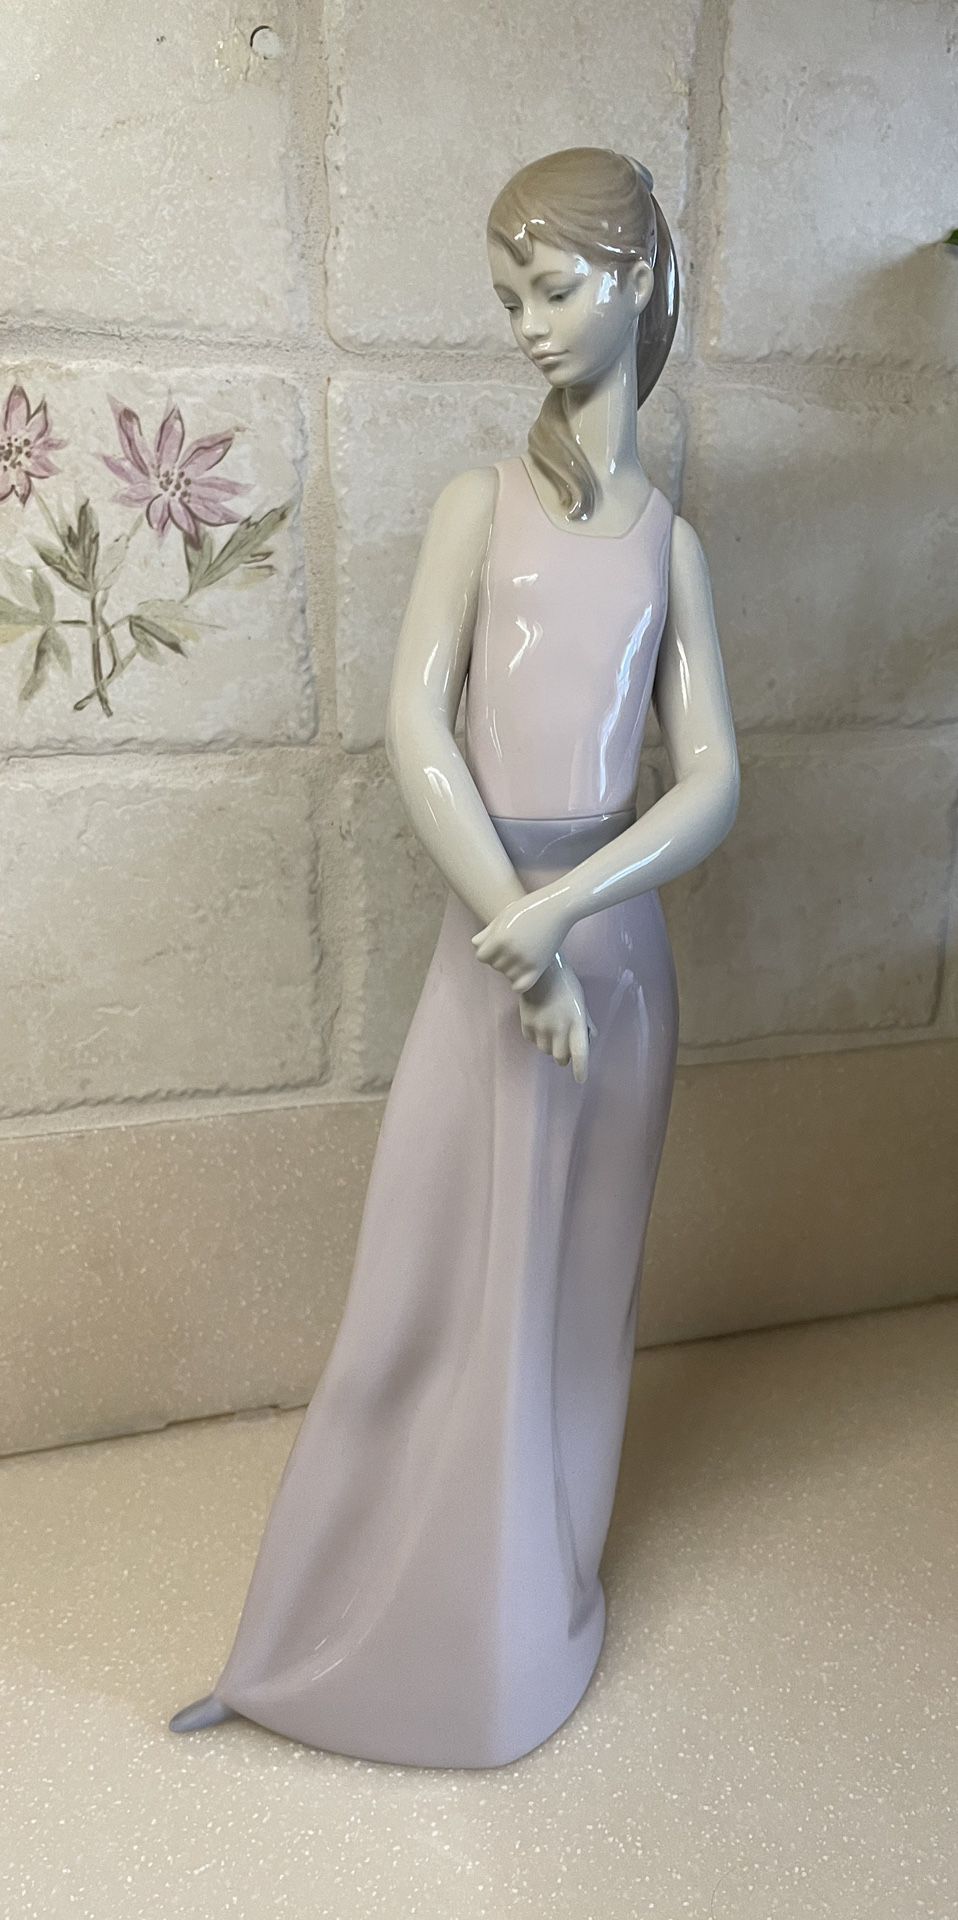 Lladro Lady Of The Rose Figurine 6857 missing the rose